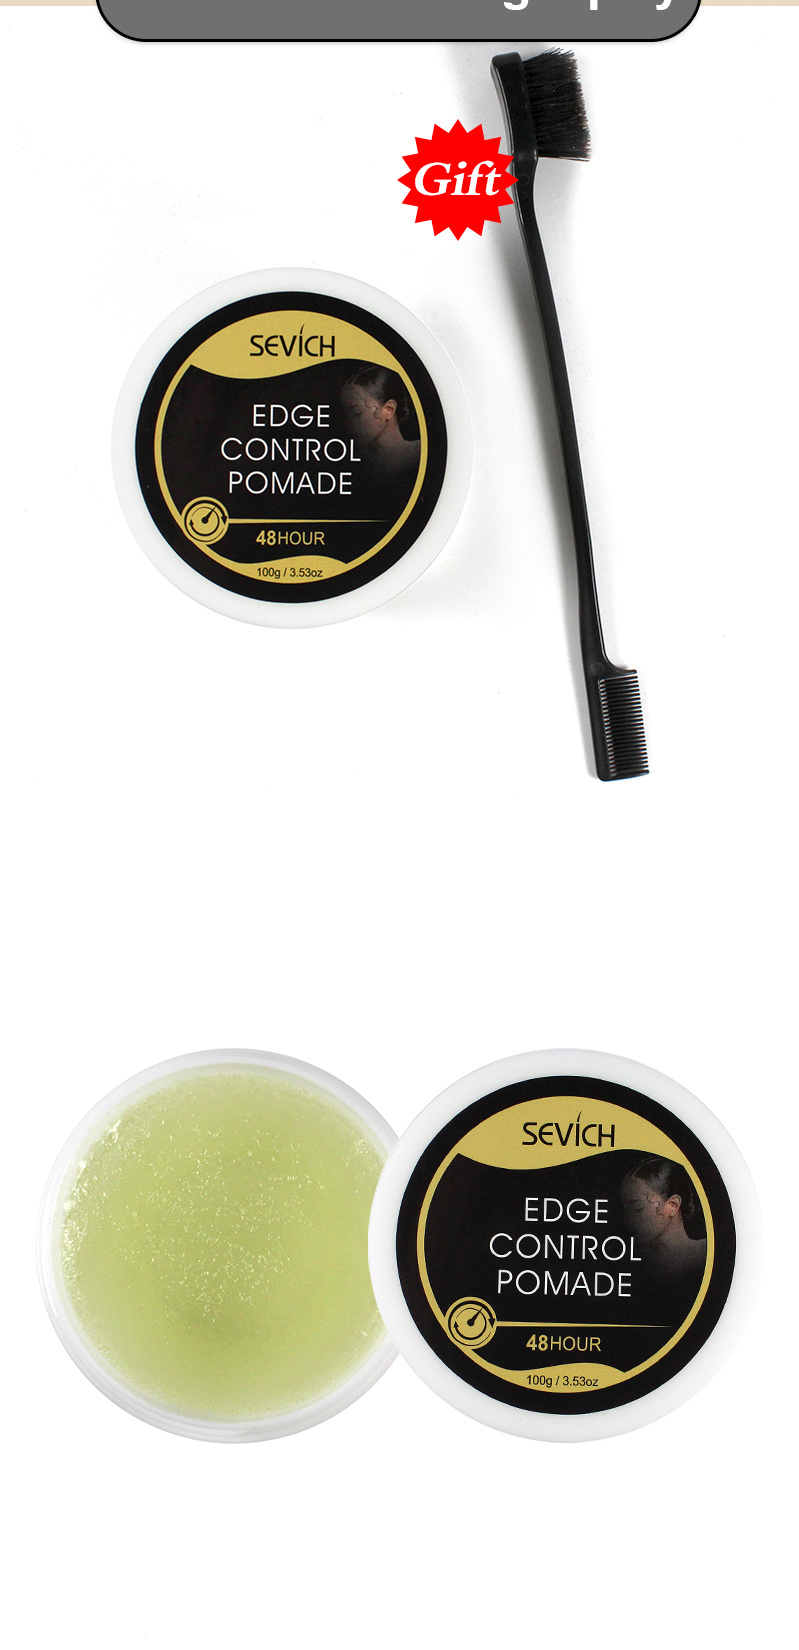 Wholesale Extra Strong Hold Edge Control with Brush